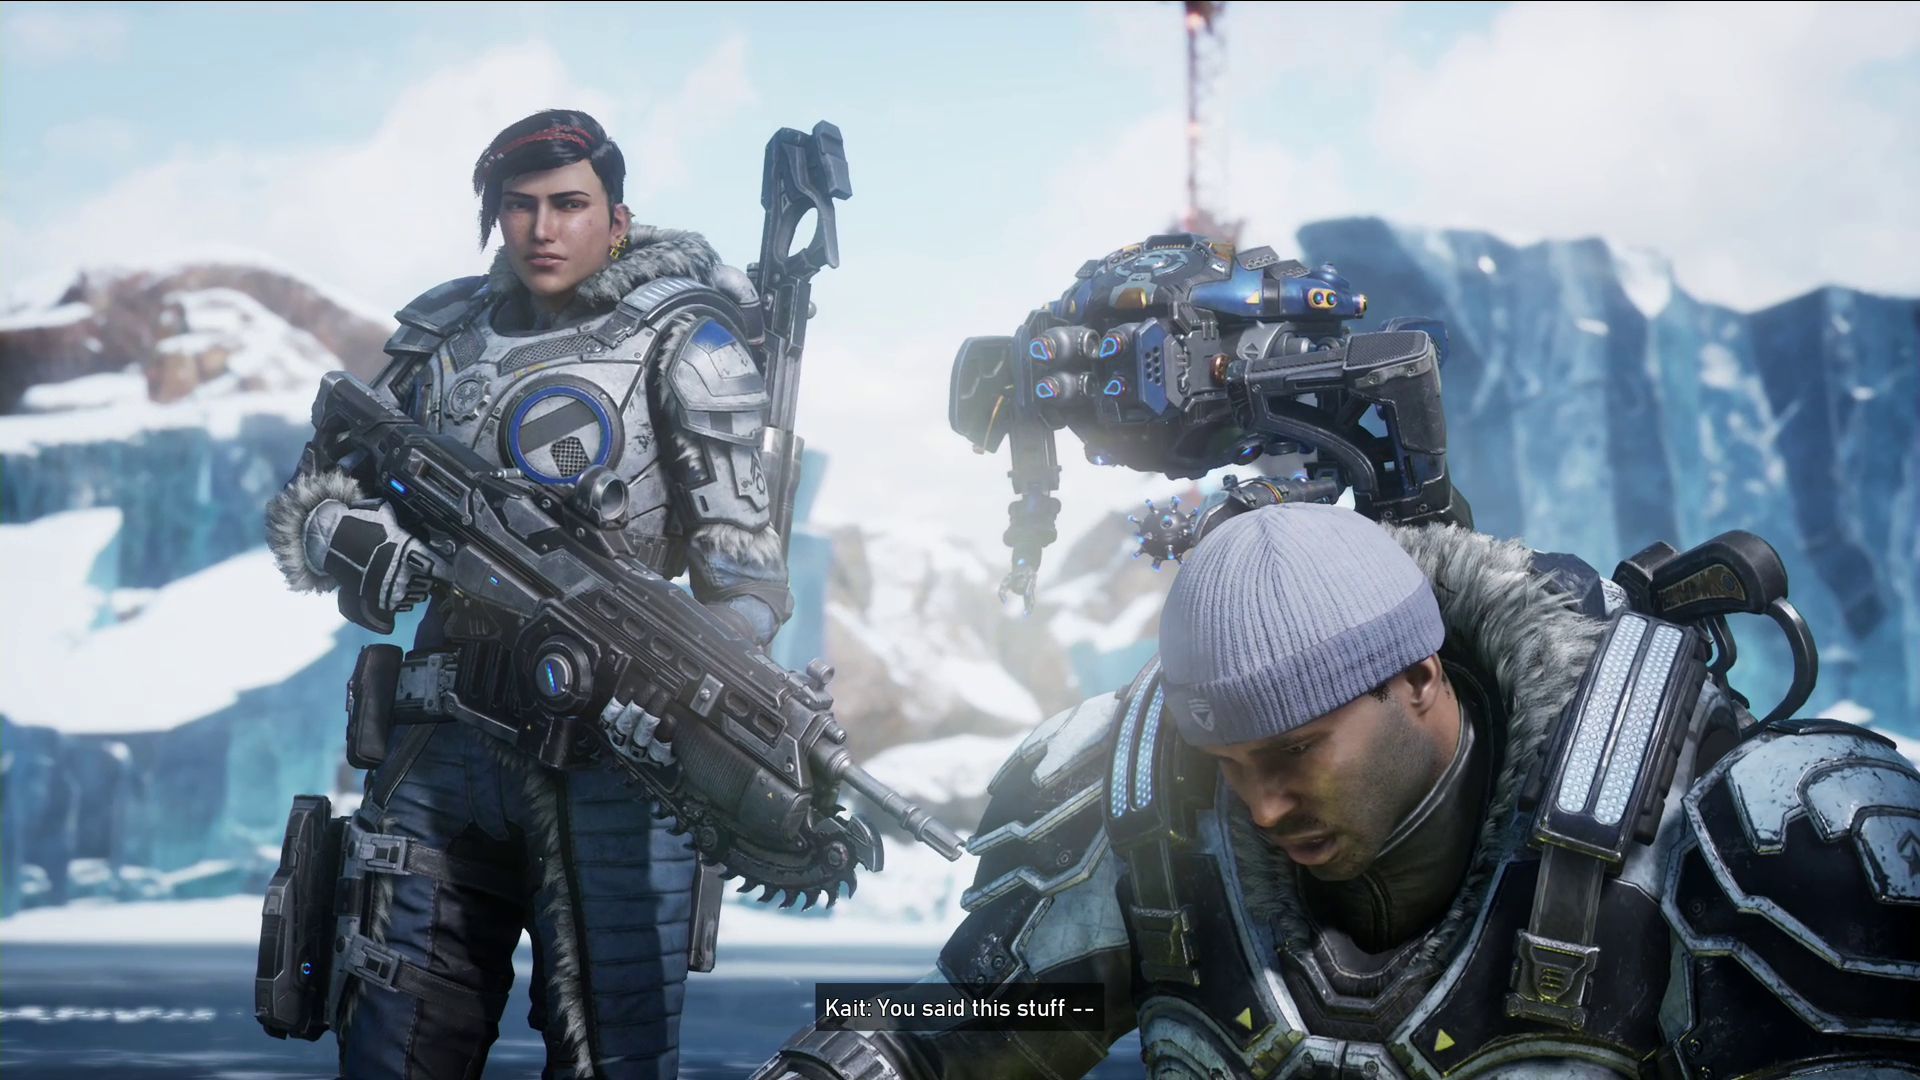 Gears 5 will unlock achievements for its soon-to-be-removed map builder